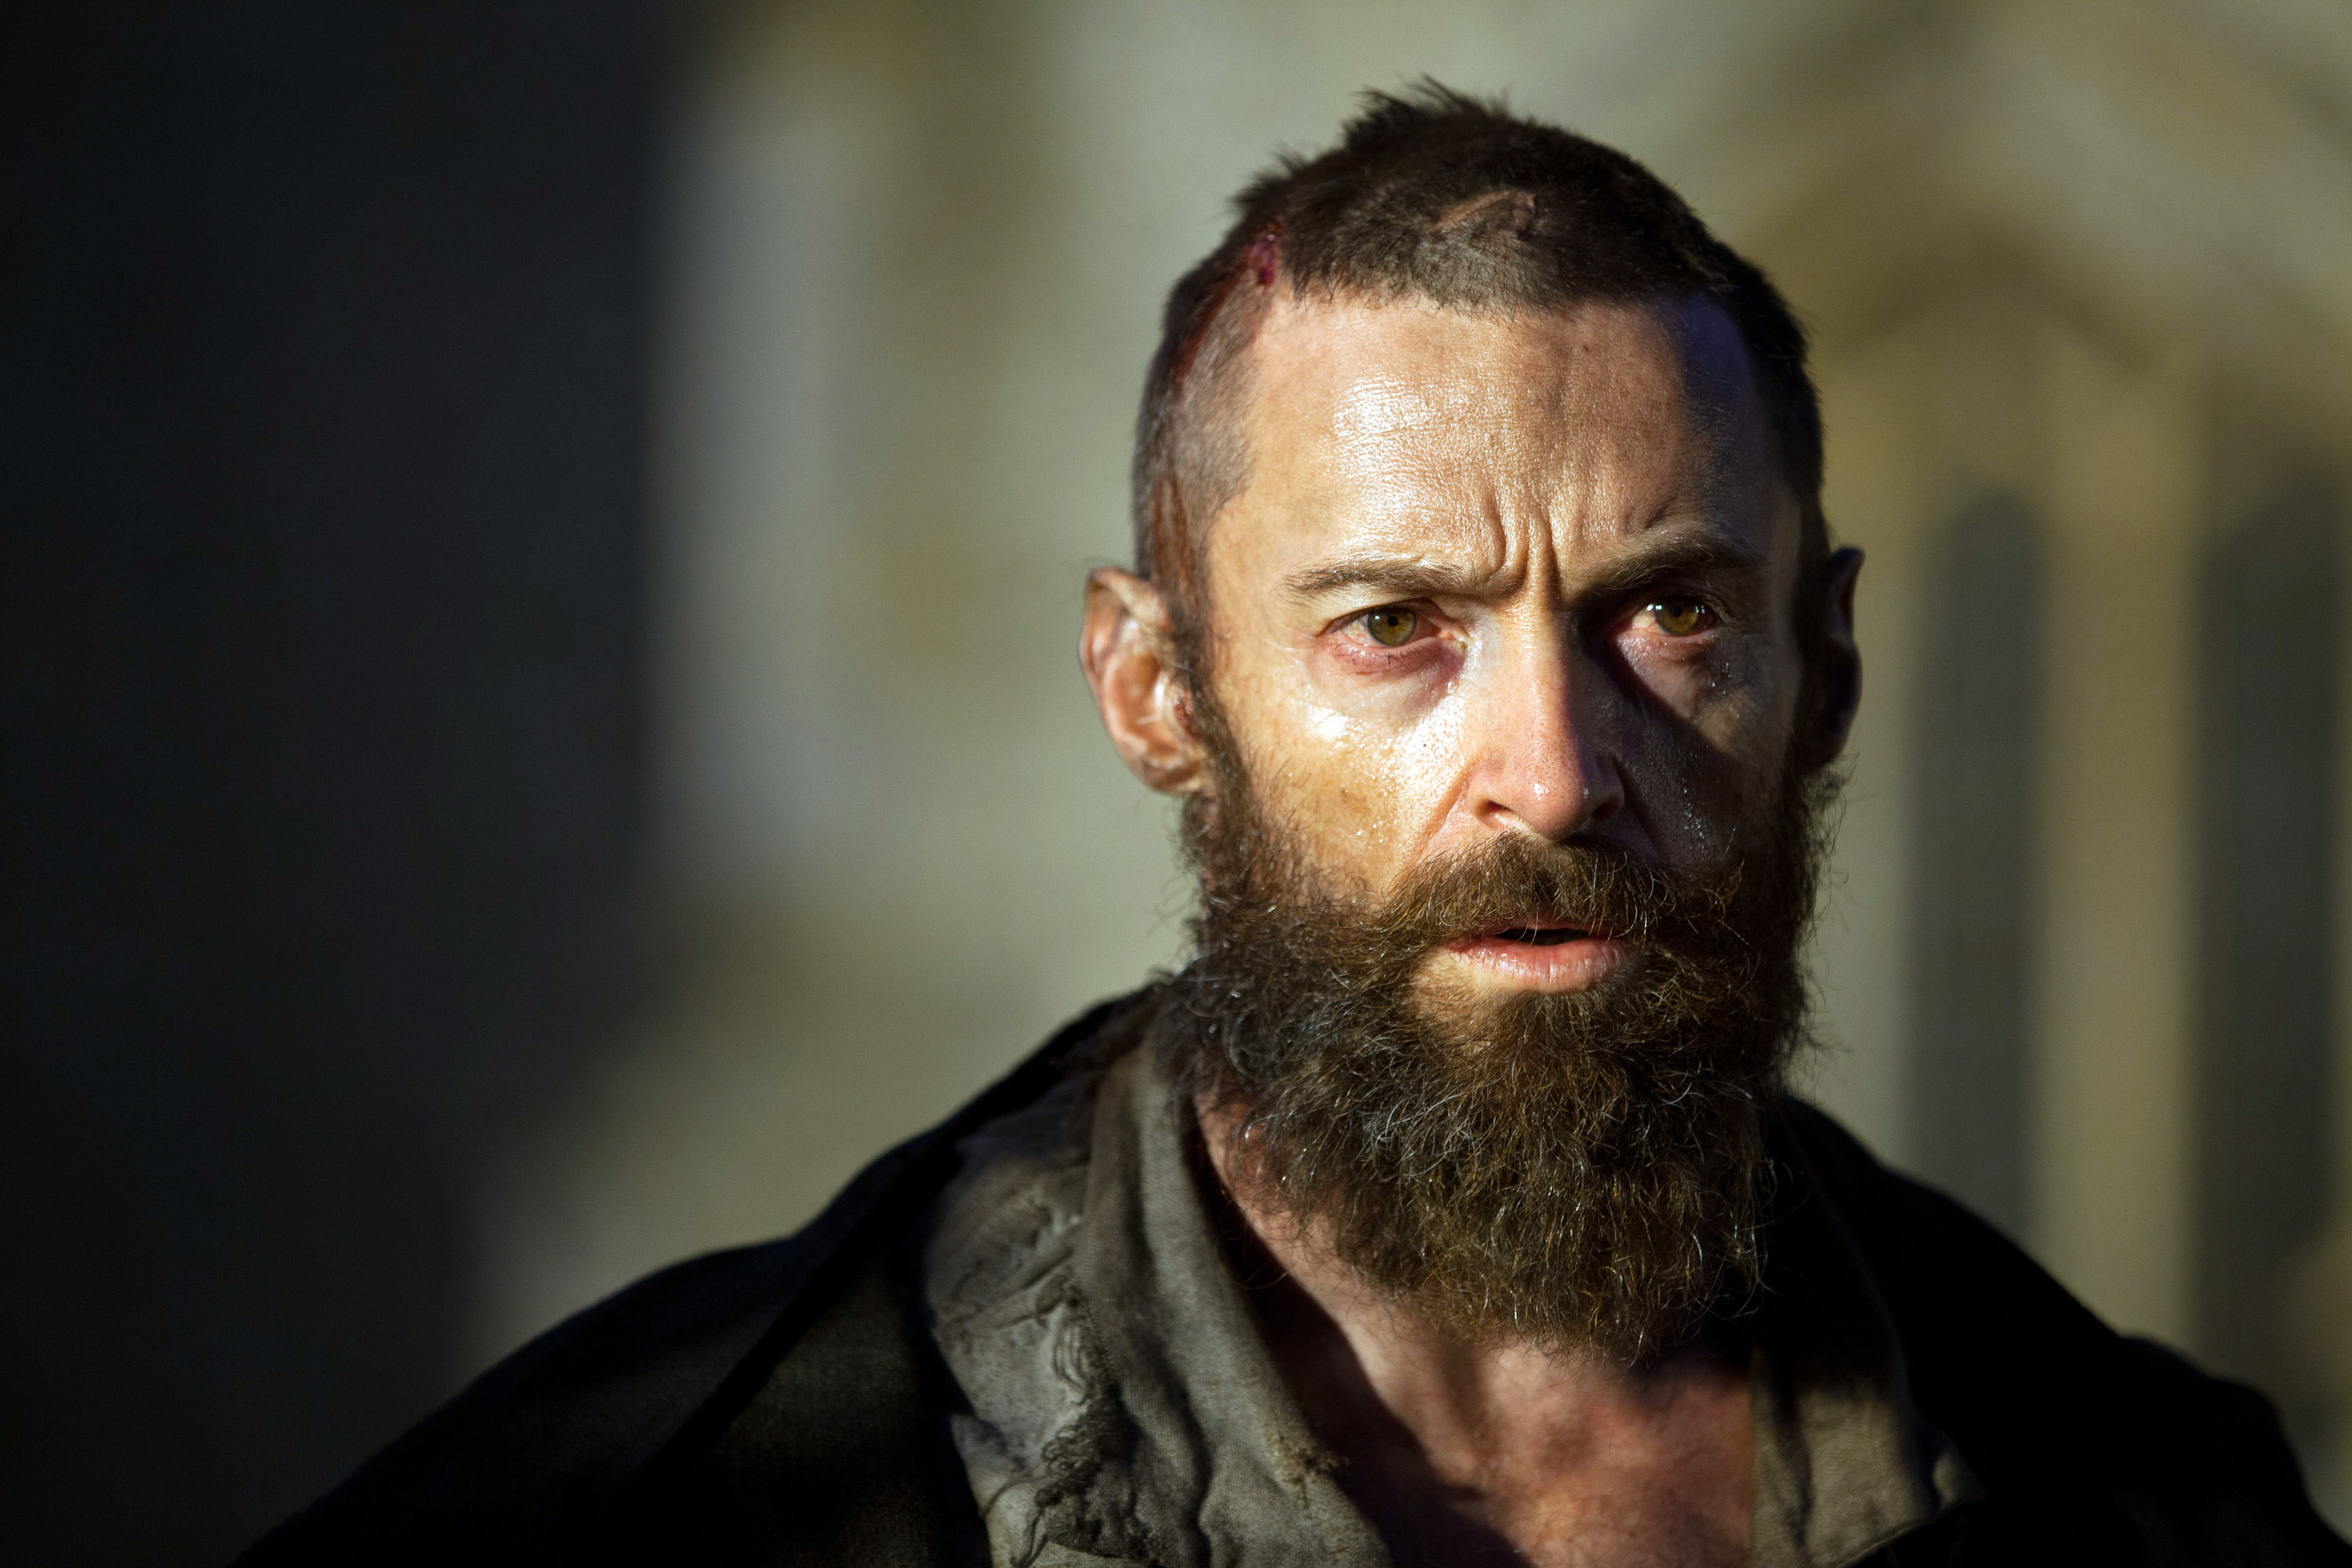 Jackman in the film